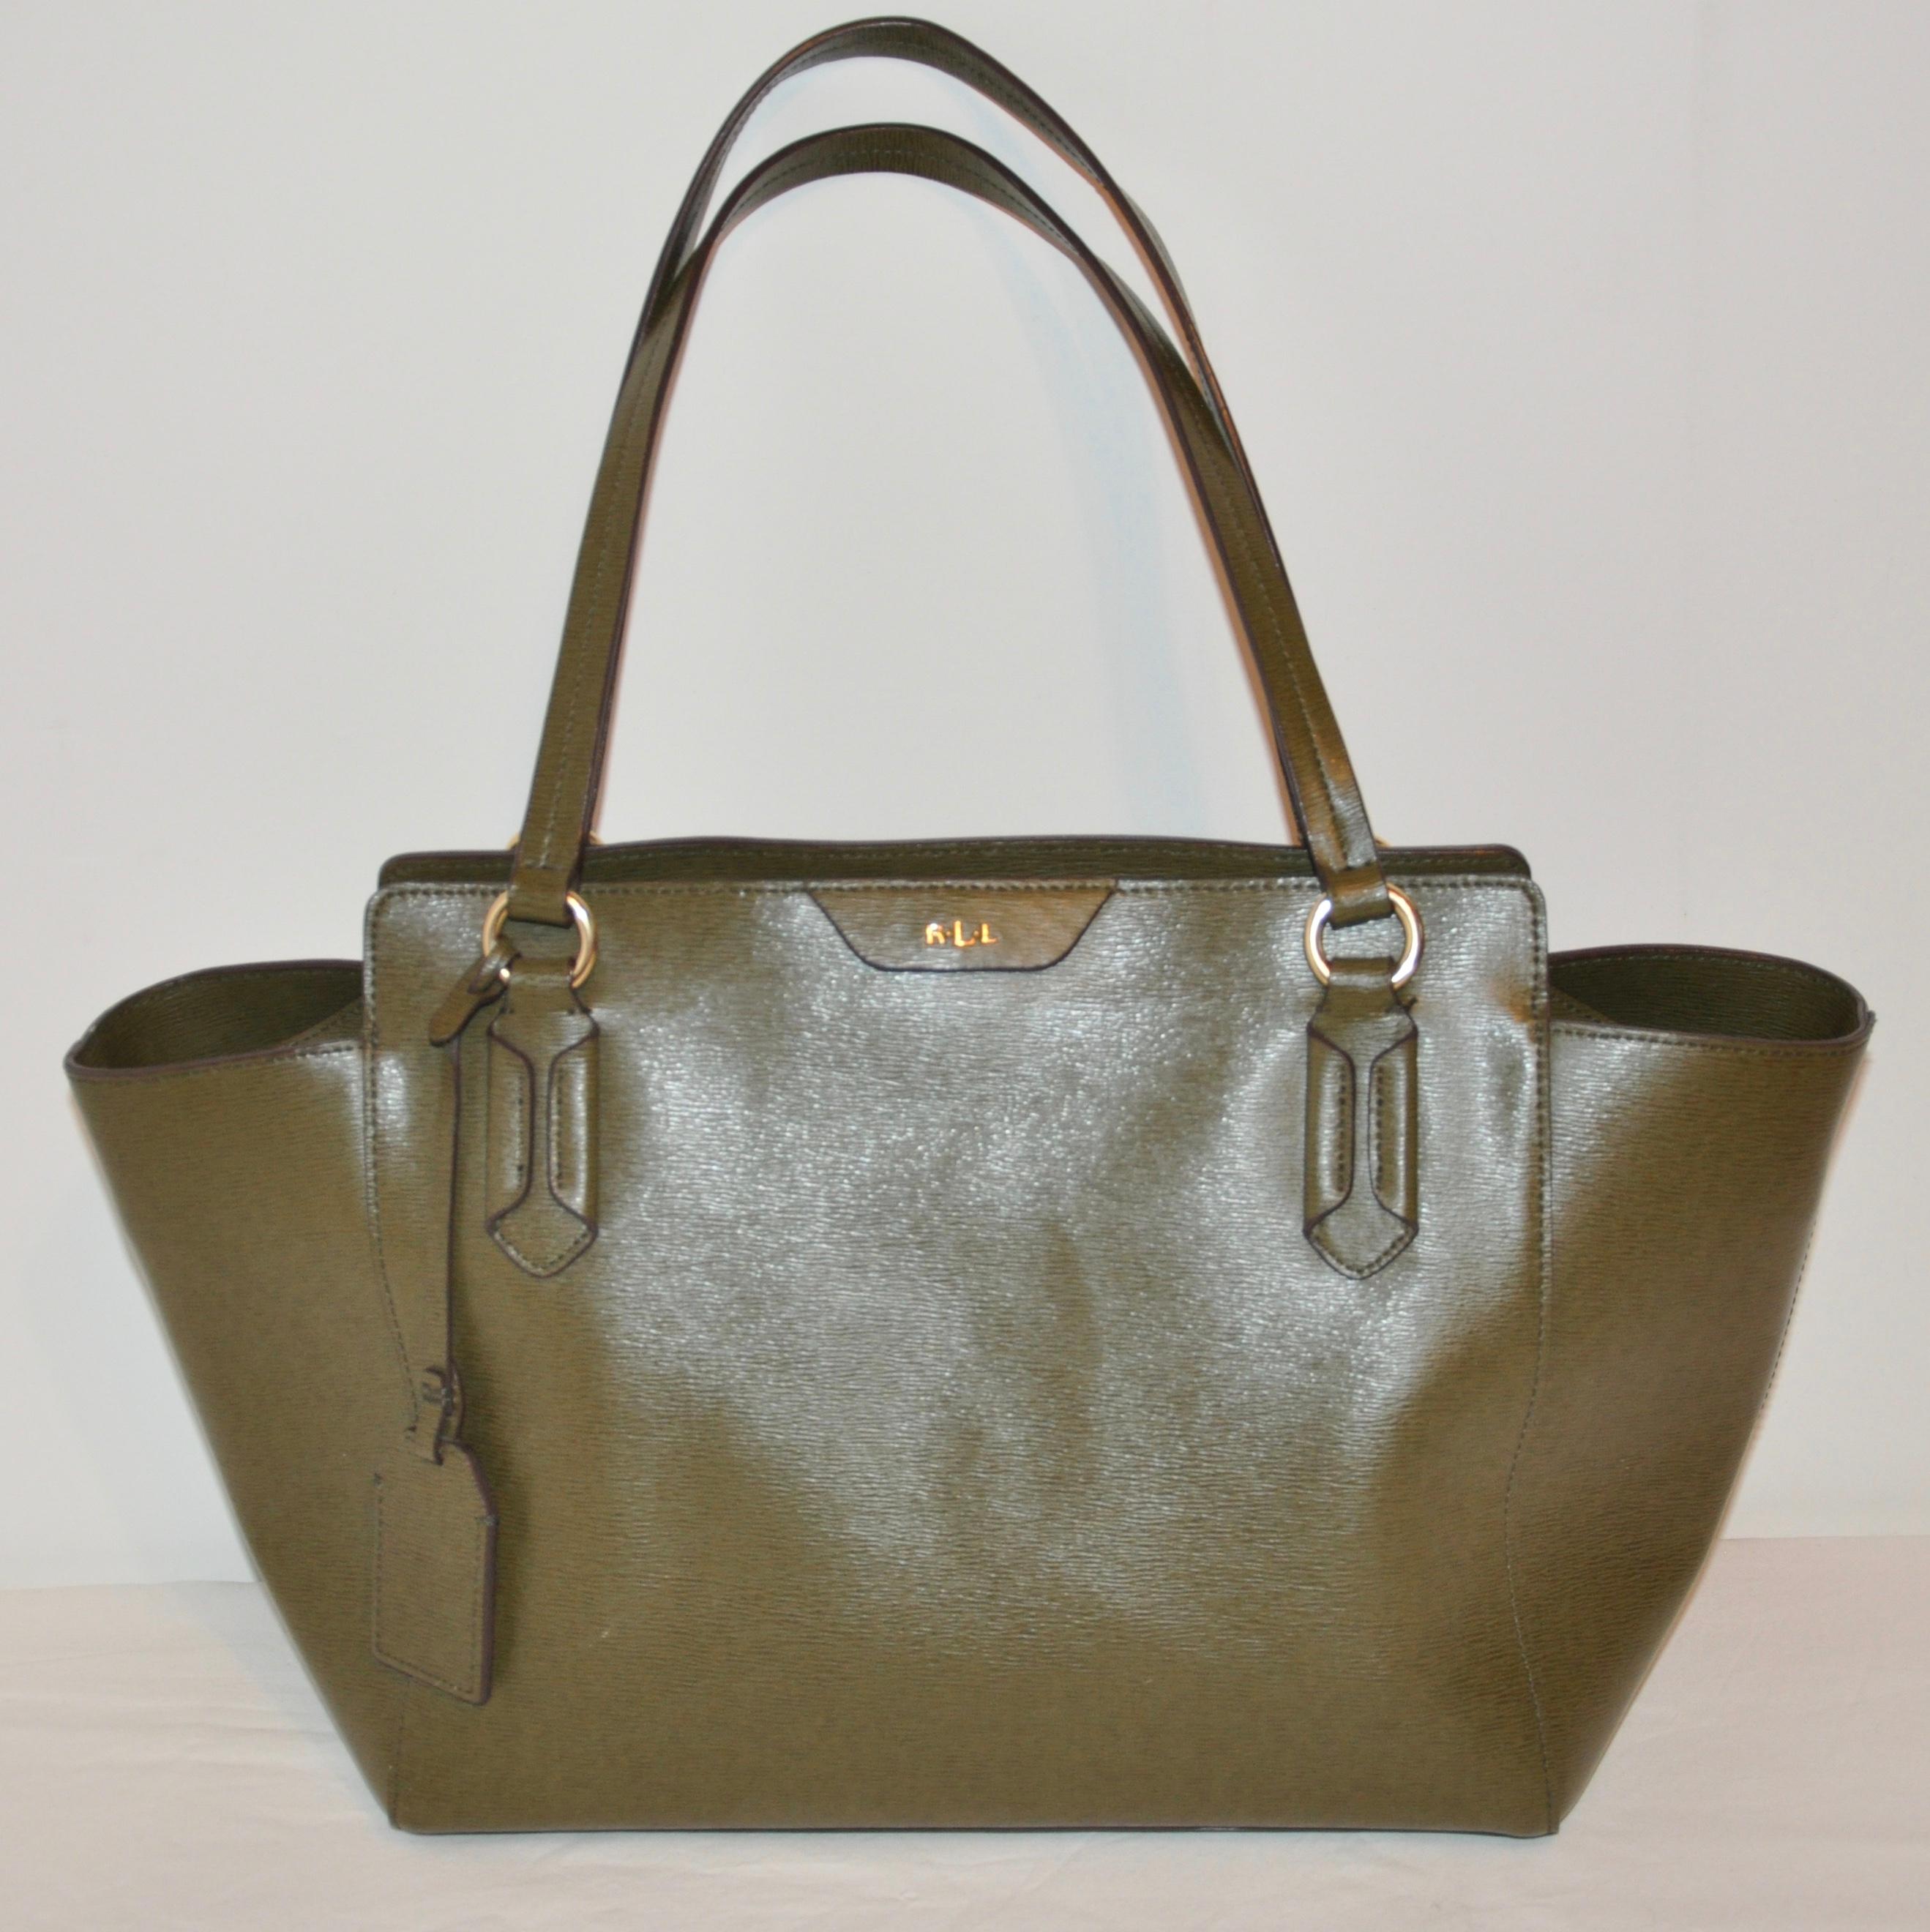        Ralph Lauren large textured calfskin olive-green double-handle tote accented with gilded gold hardware as well as gilded gold hardware footing along the bottom of the bag, measures 12 inches by 5 3/4 inches at the base. Along the top, the bag